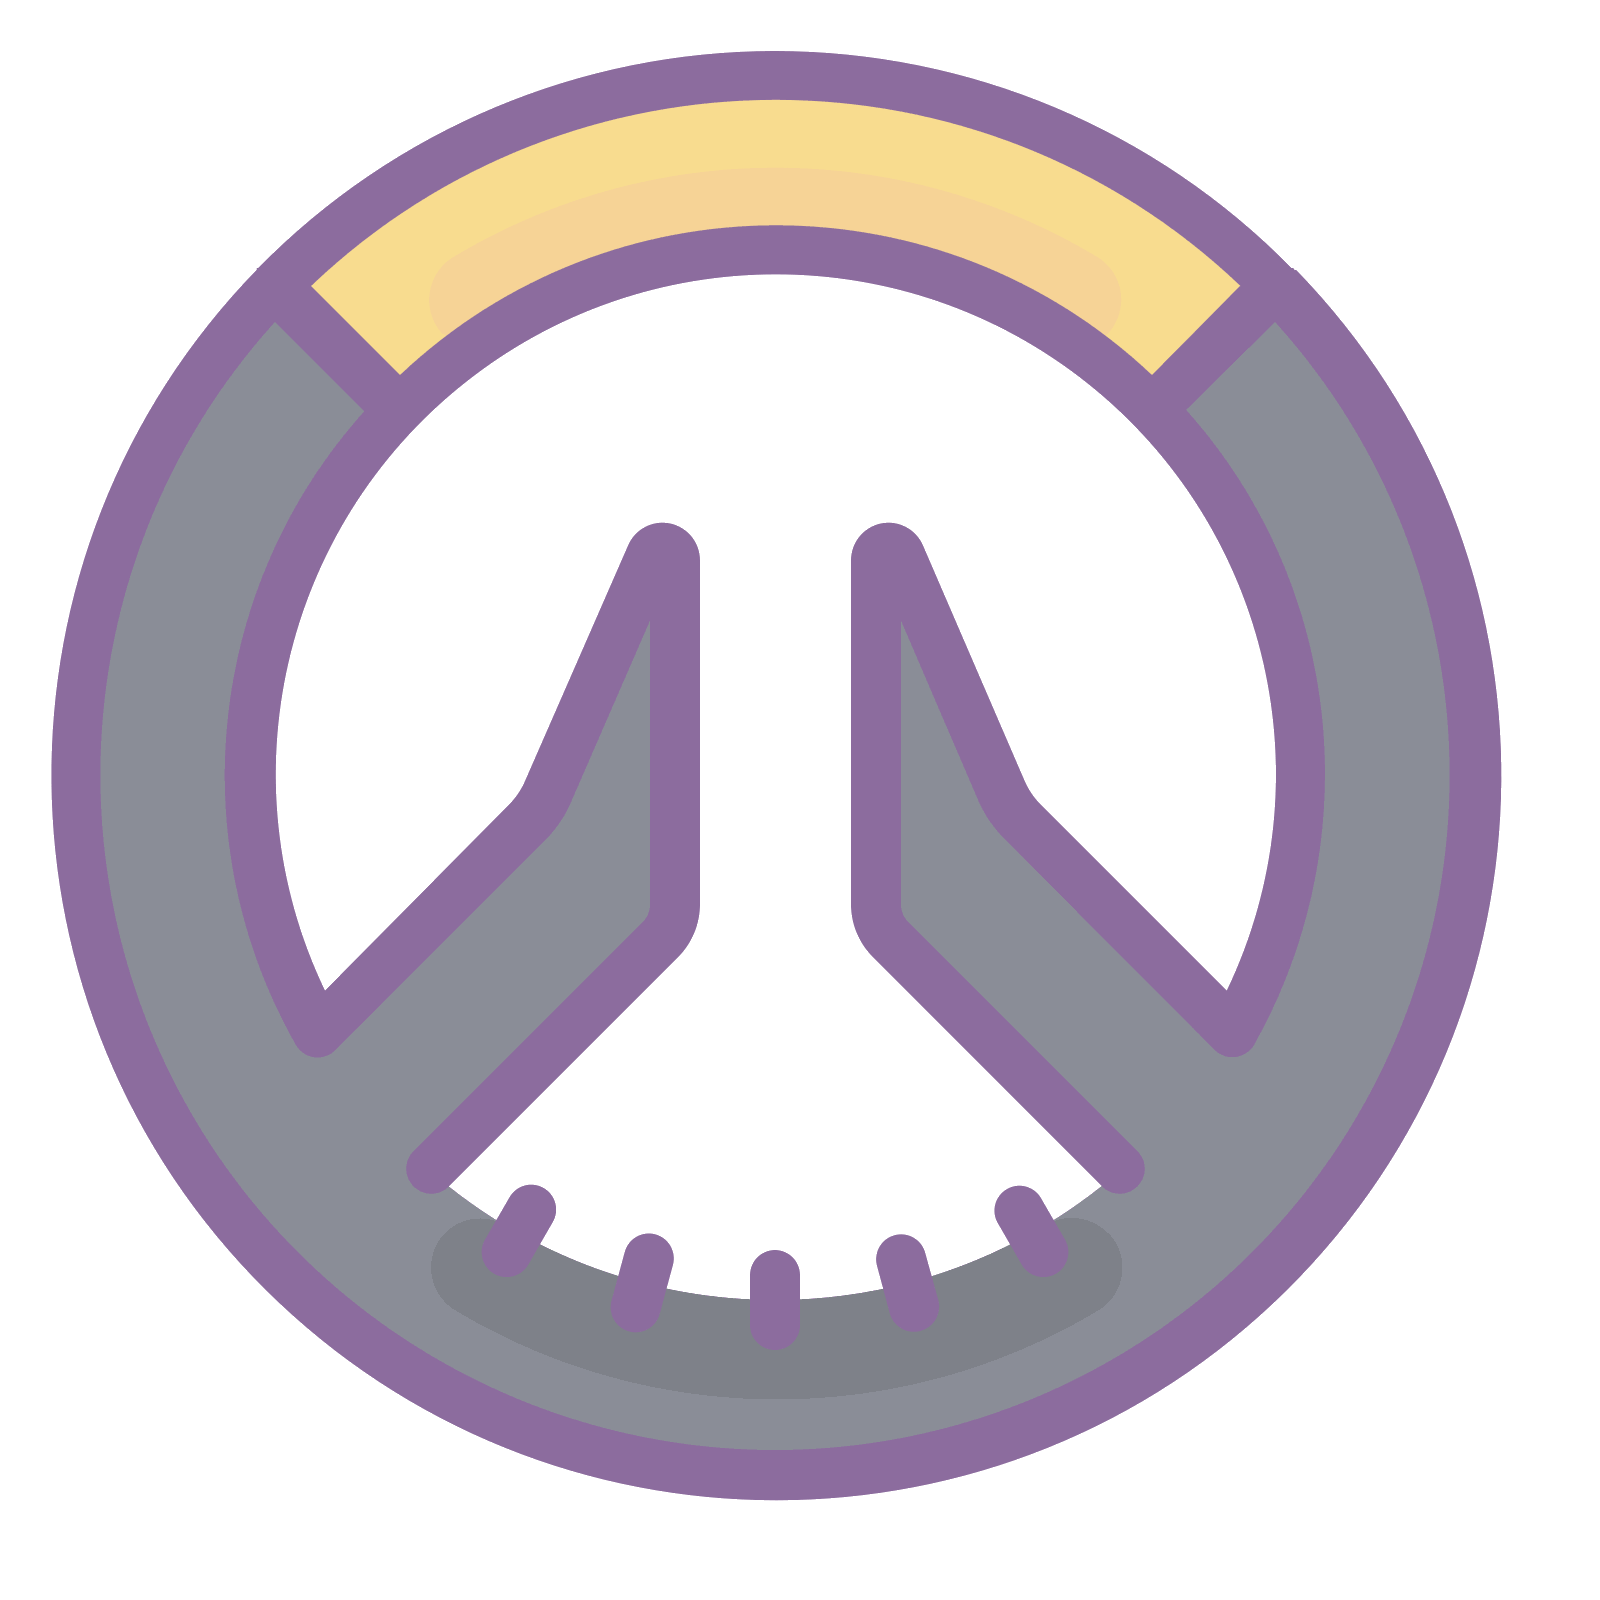  for free download. Overwatch png rtt